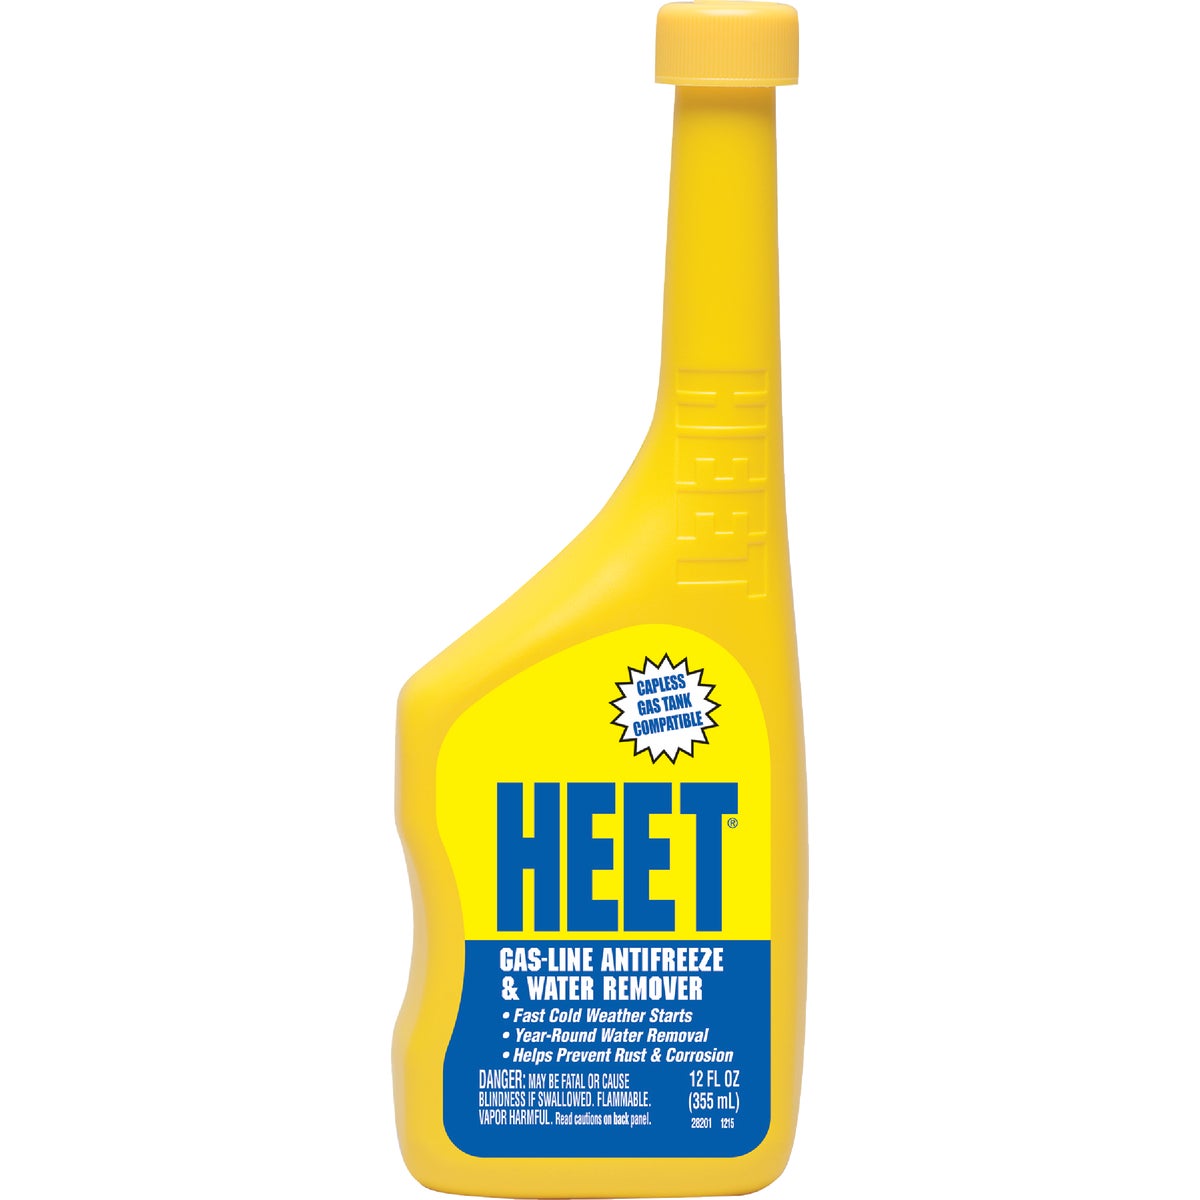 Item 574686, Heet aids in quick cold weather starts while preventing frozen fuel lines.